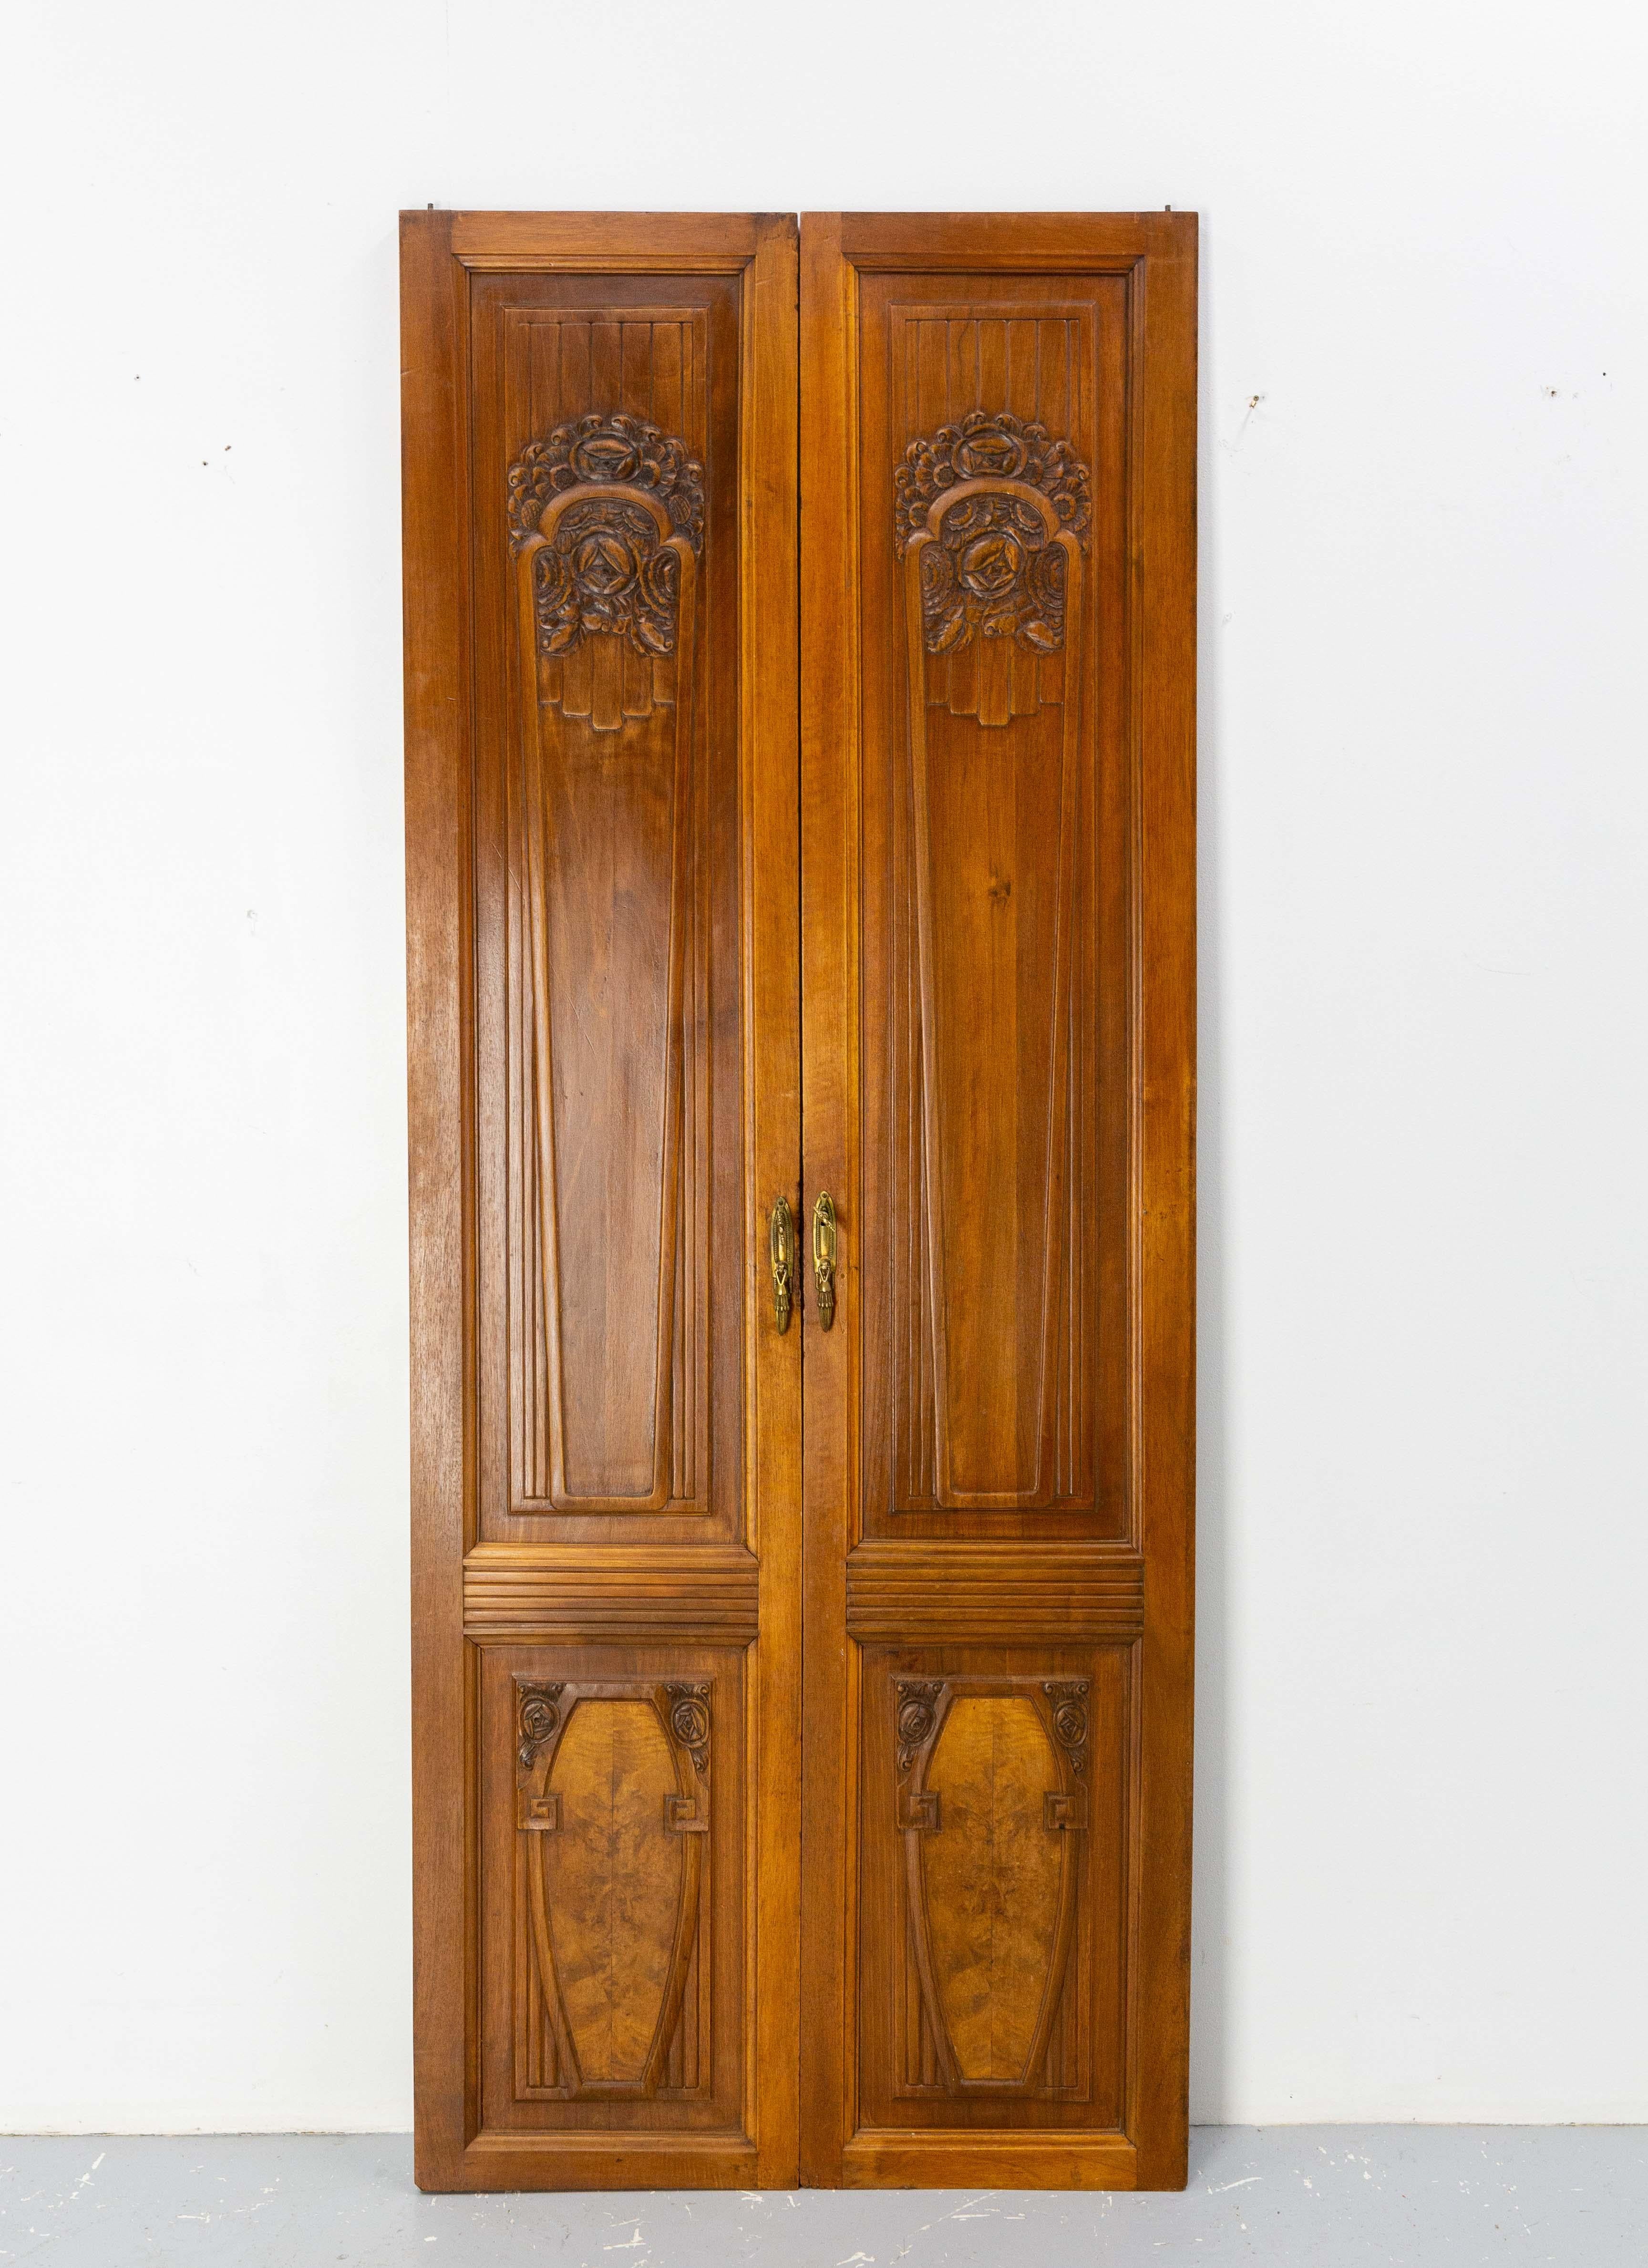 Pair of Art Déco doors
Walnut and brass made circa 1930.
With par of doors can be integrated into a wall cabinet. 
This doors come from an armoire.
Good condition


Shipping:
180/36/6 11Kg.

